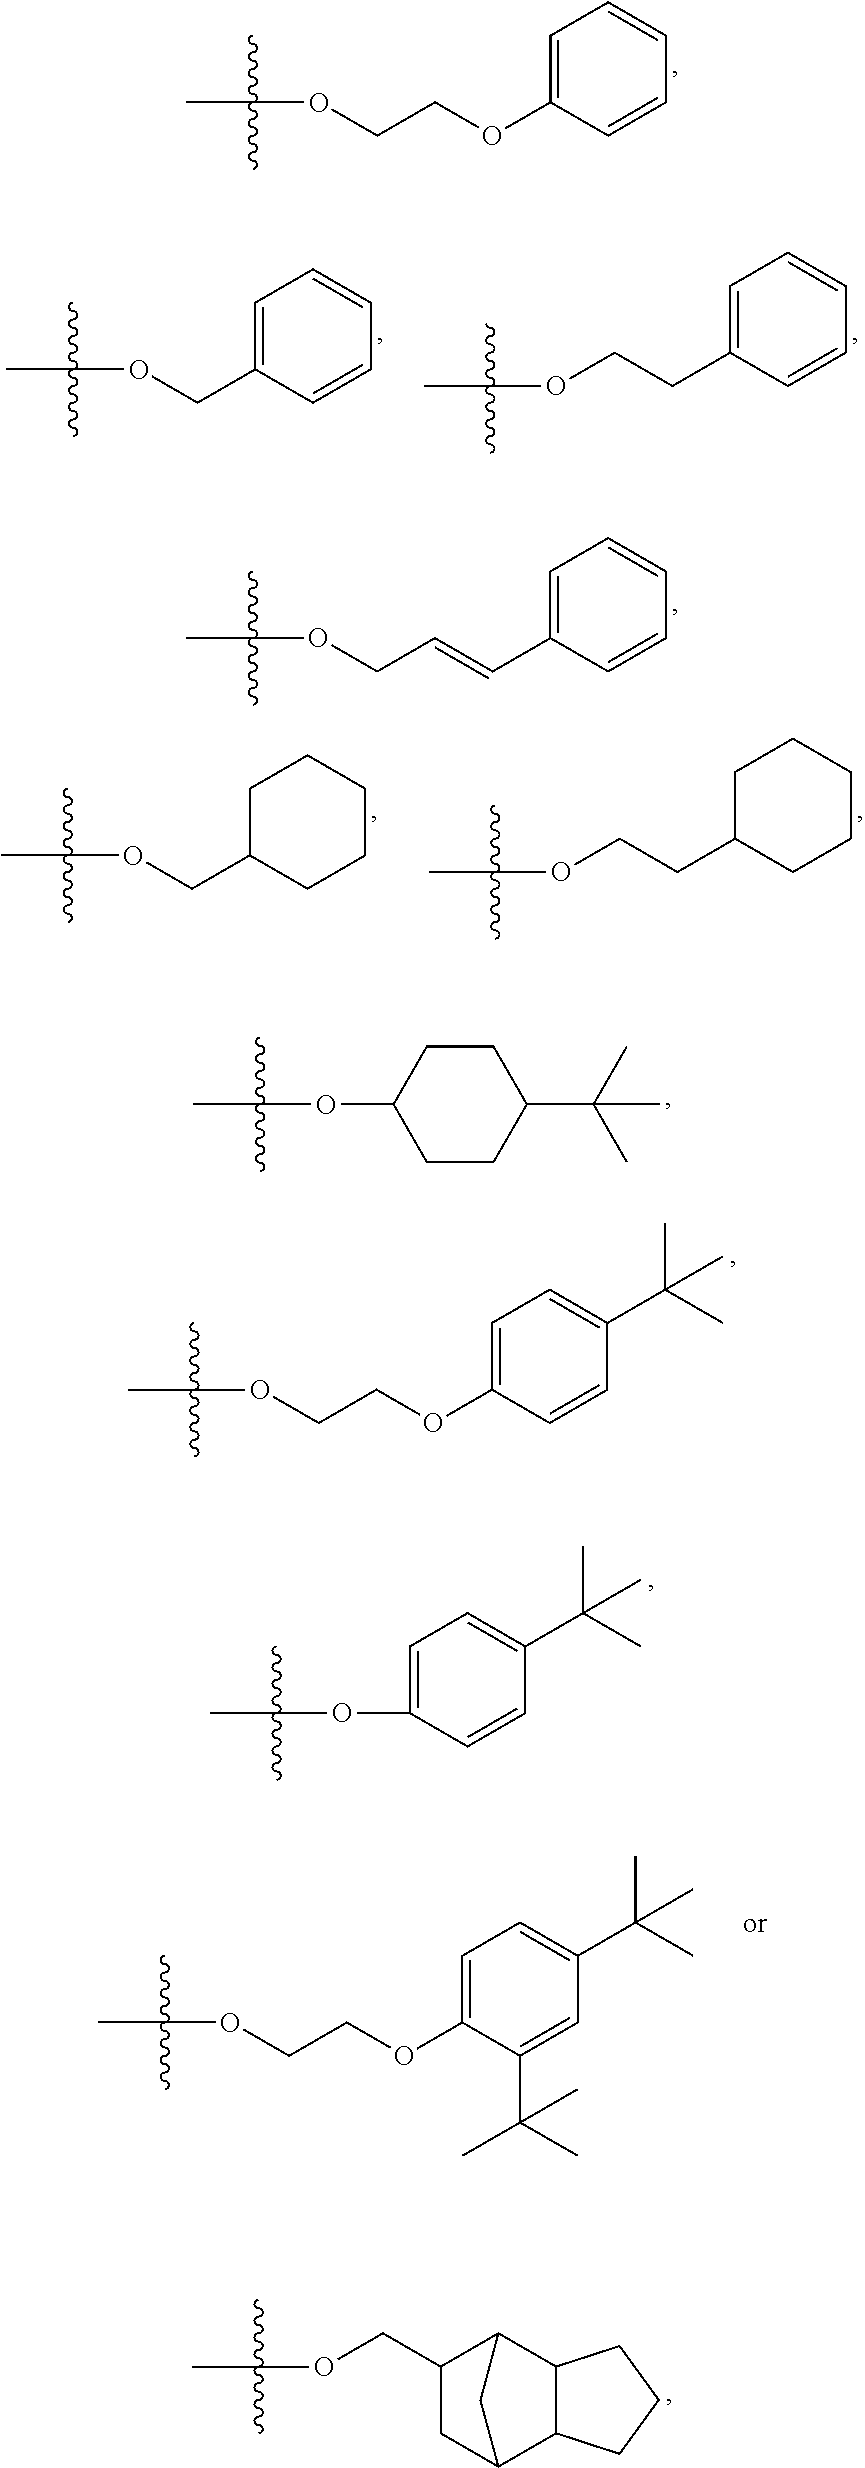 Thermosetting adhesive compositions